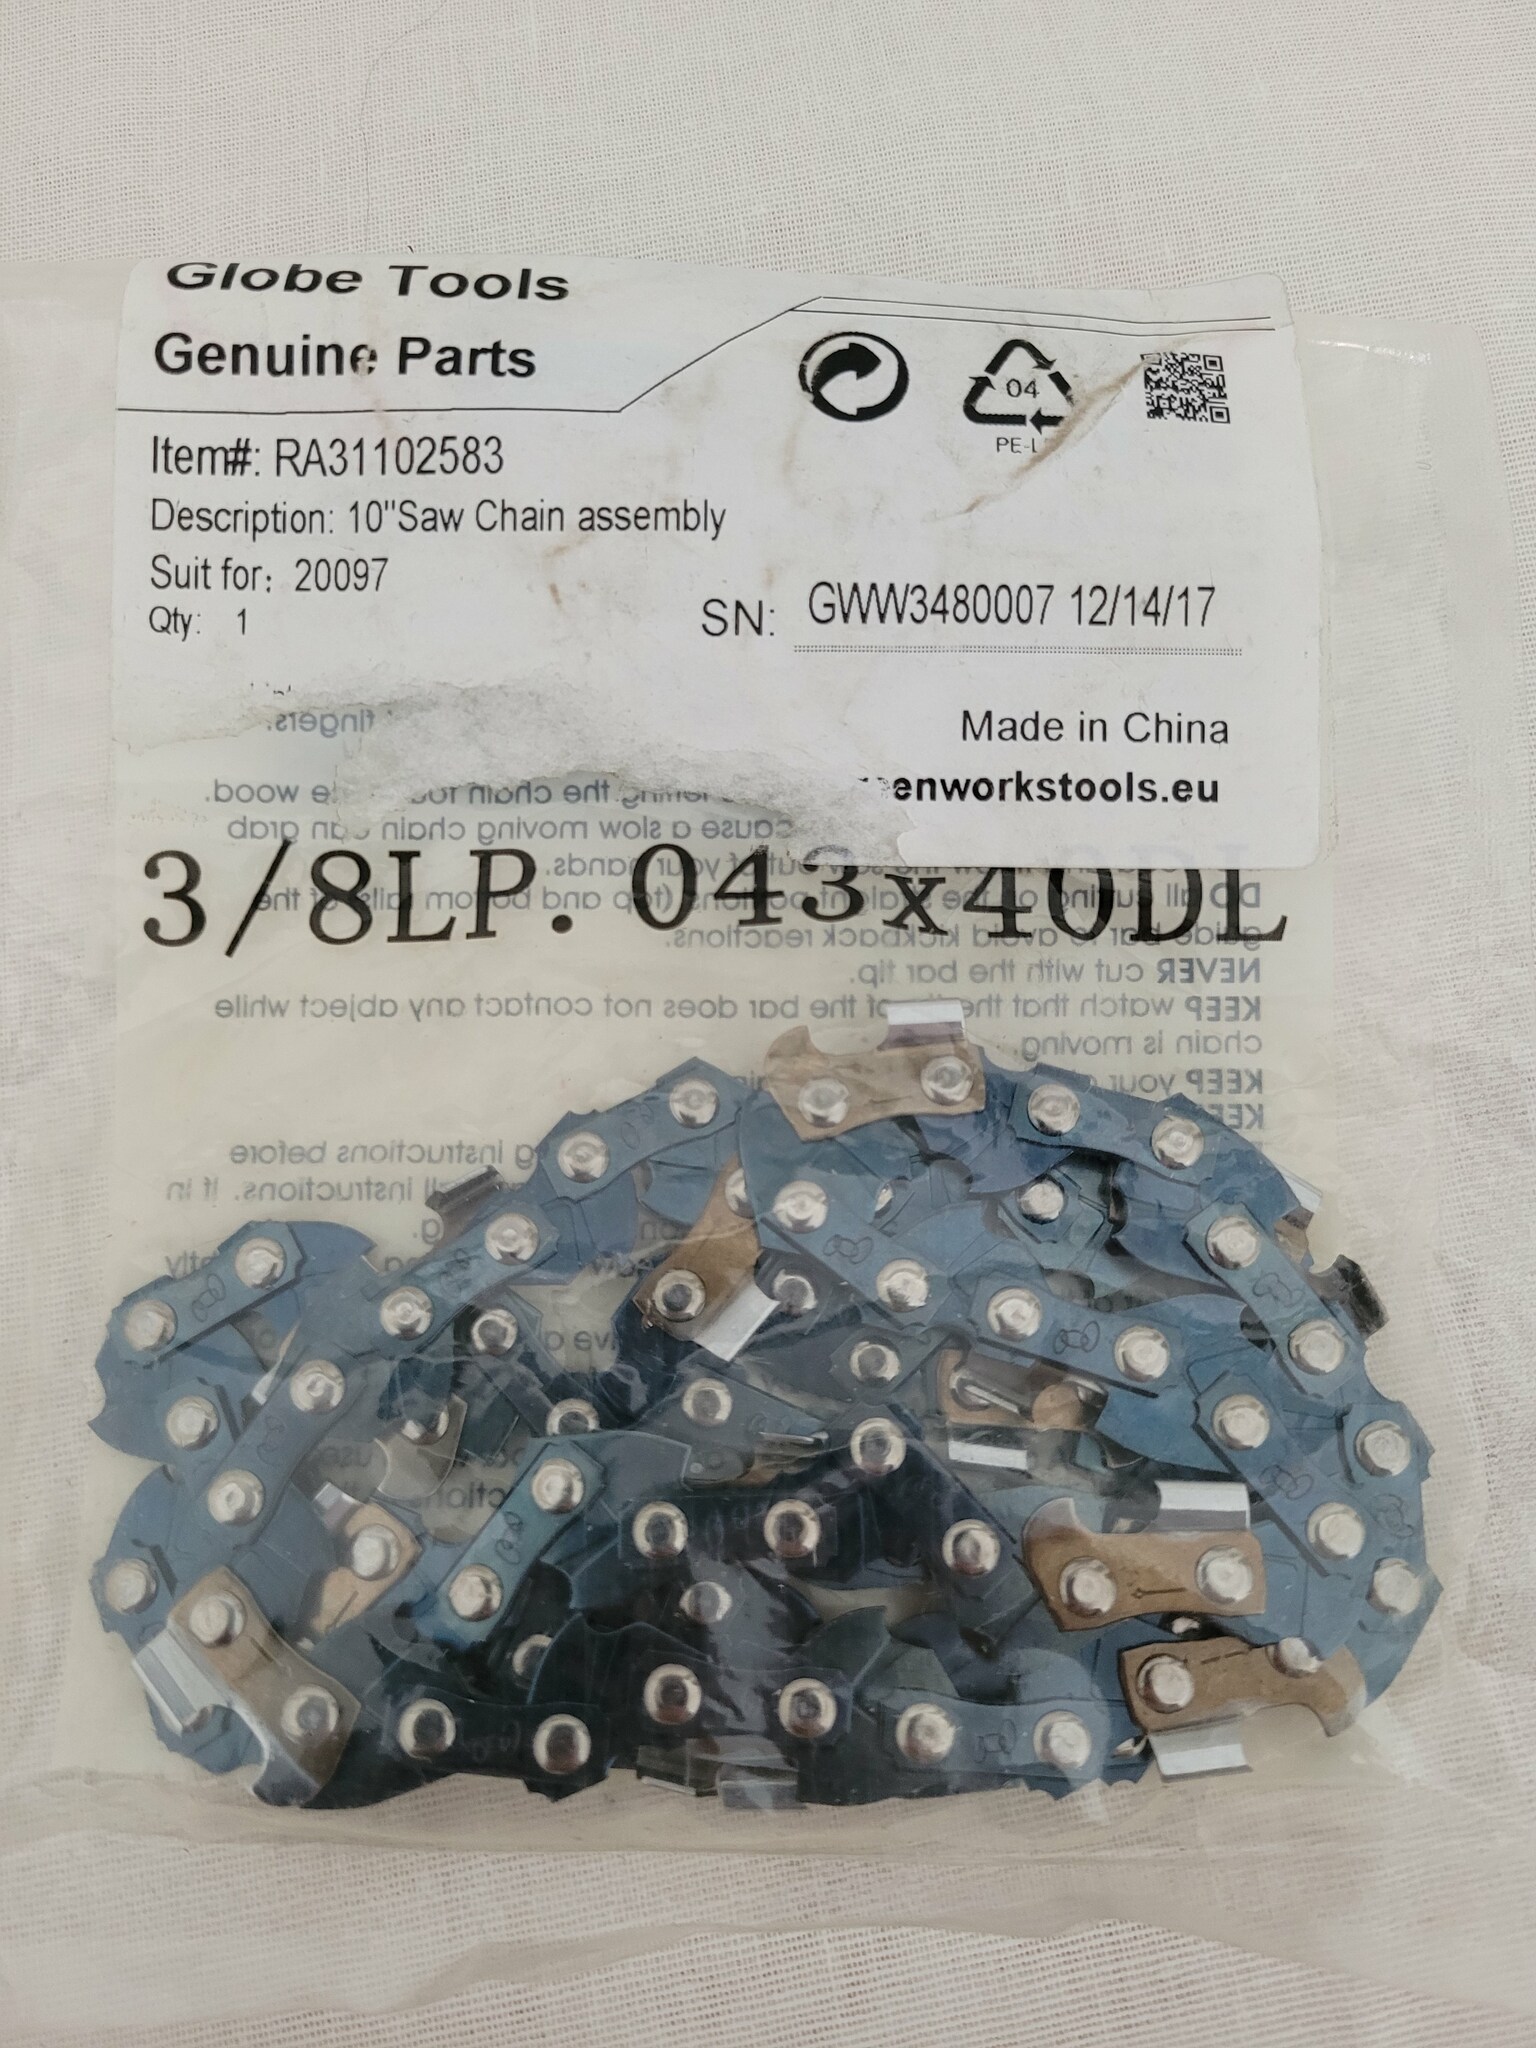 Greenworks 10"Saw Chain assembly